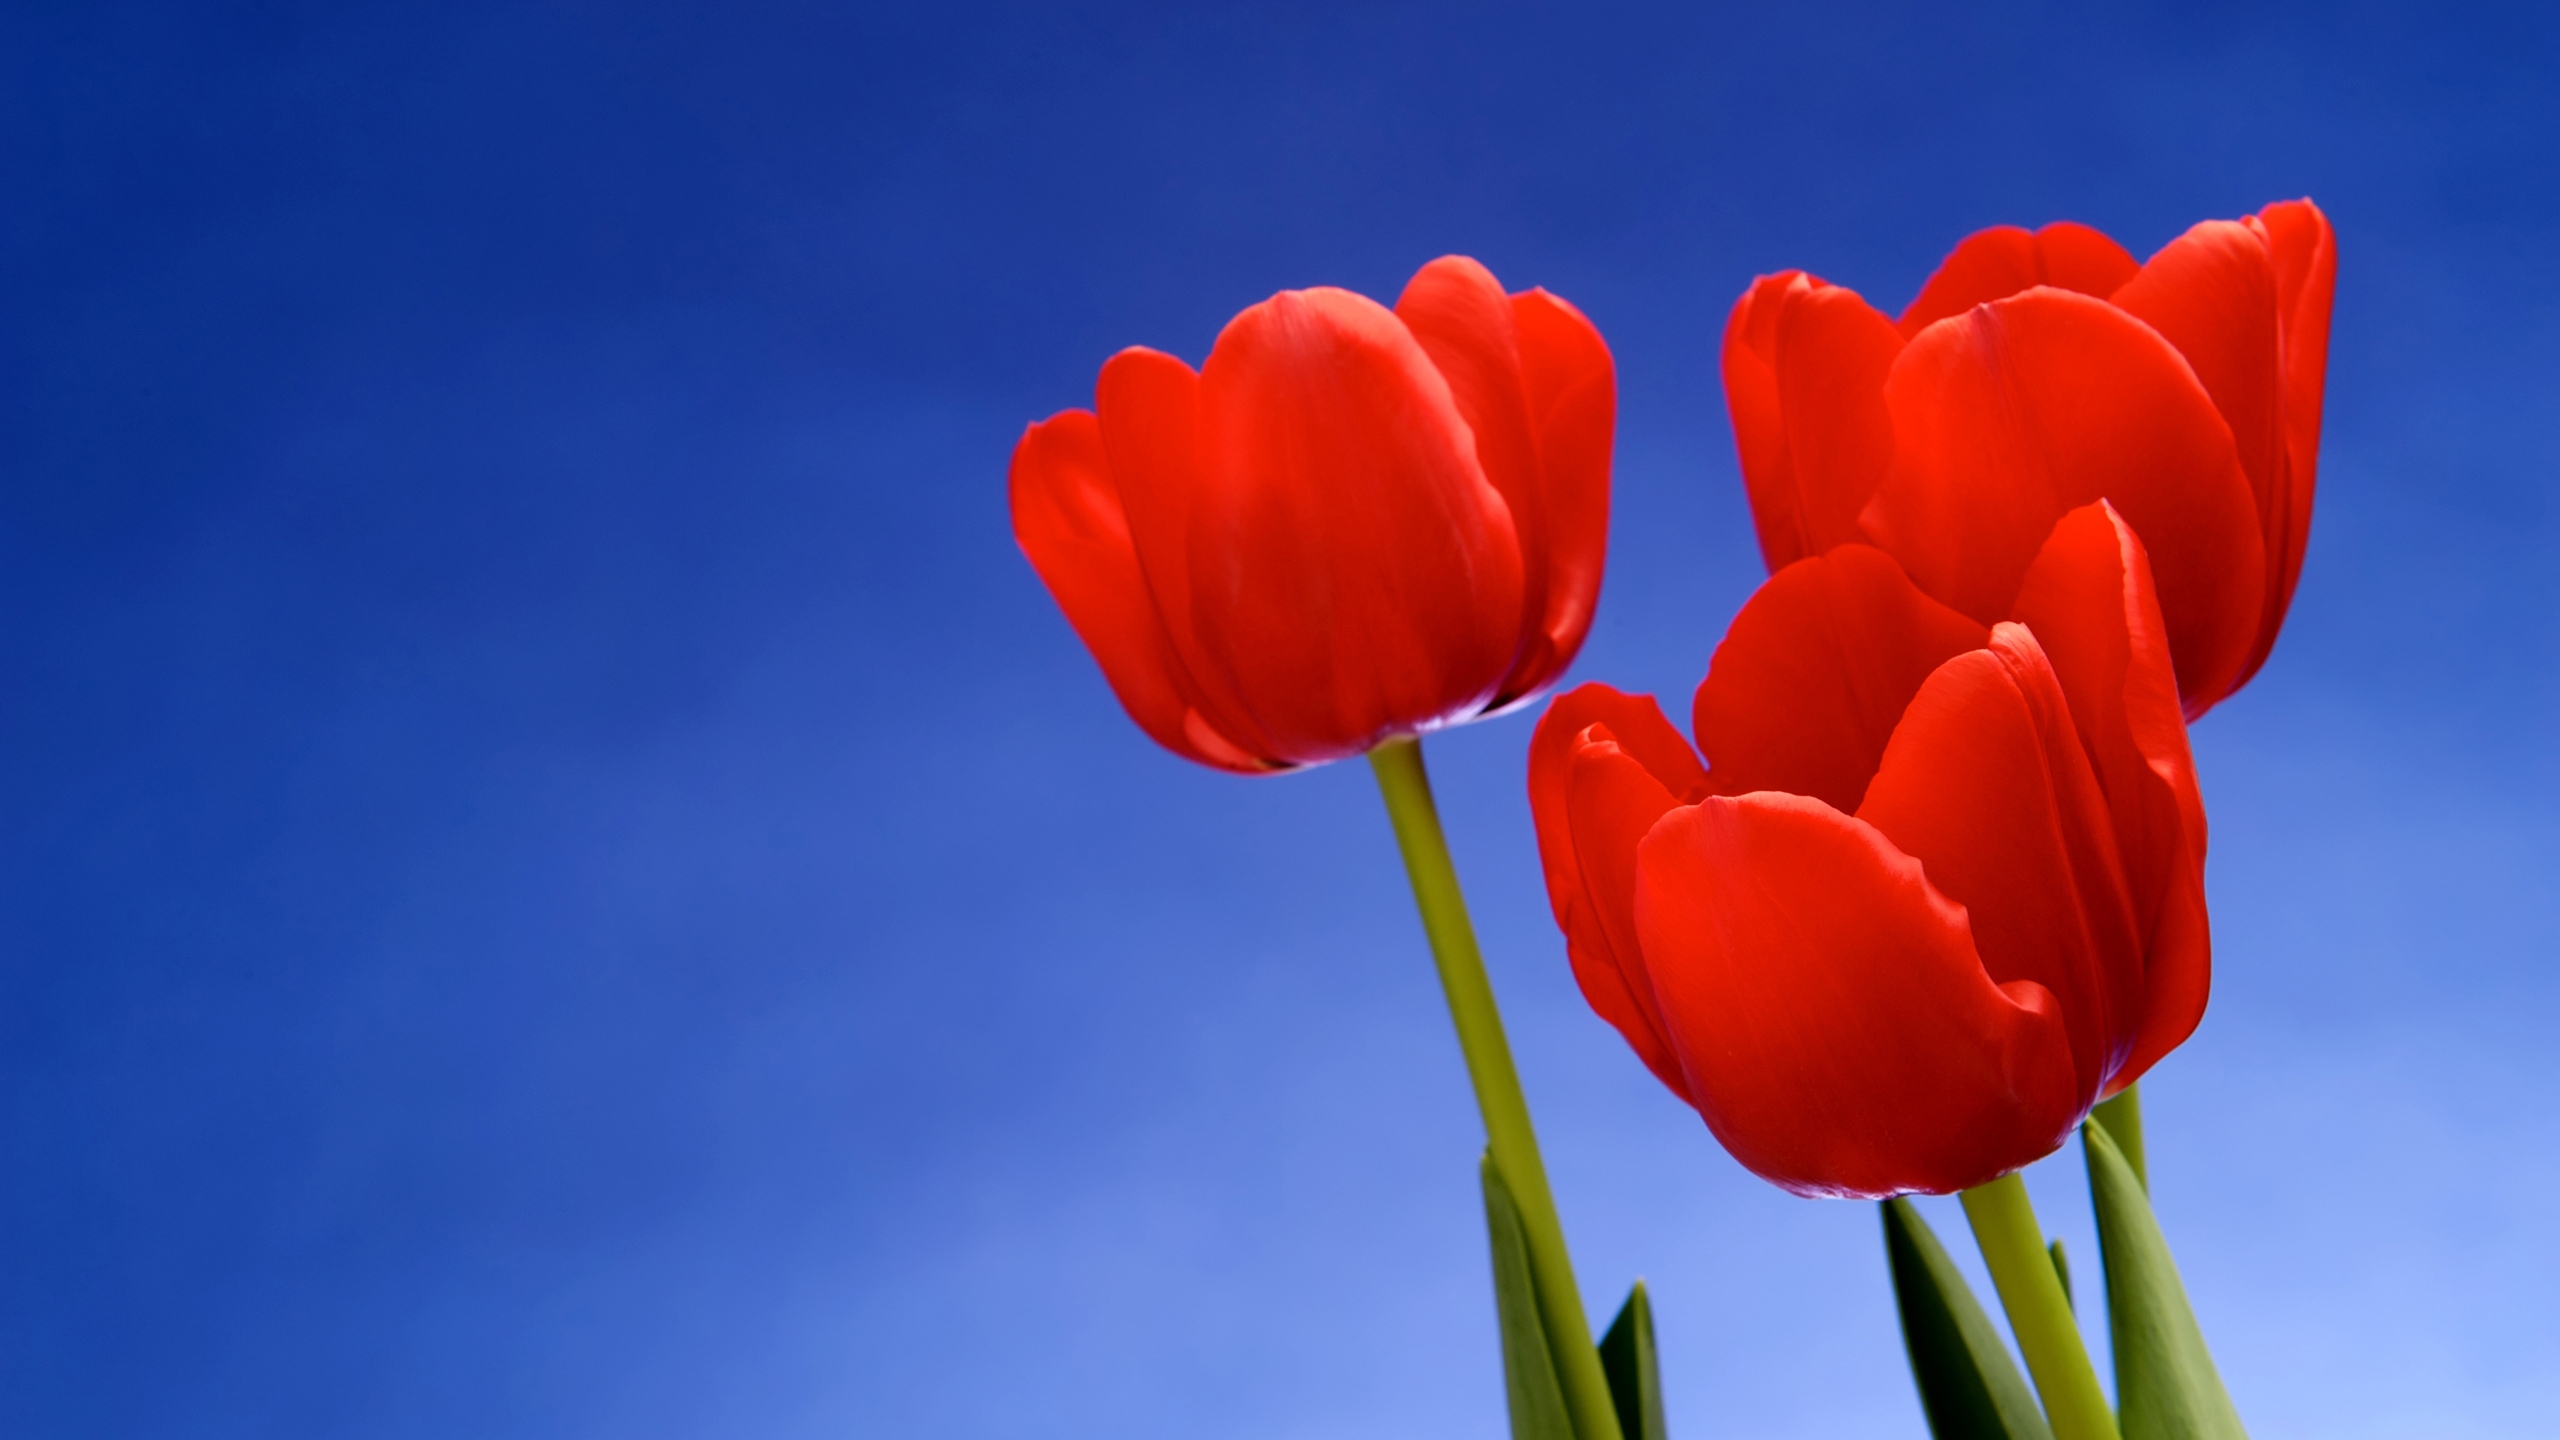 Red Tulips for 2560x1440 HDTV resolution